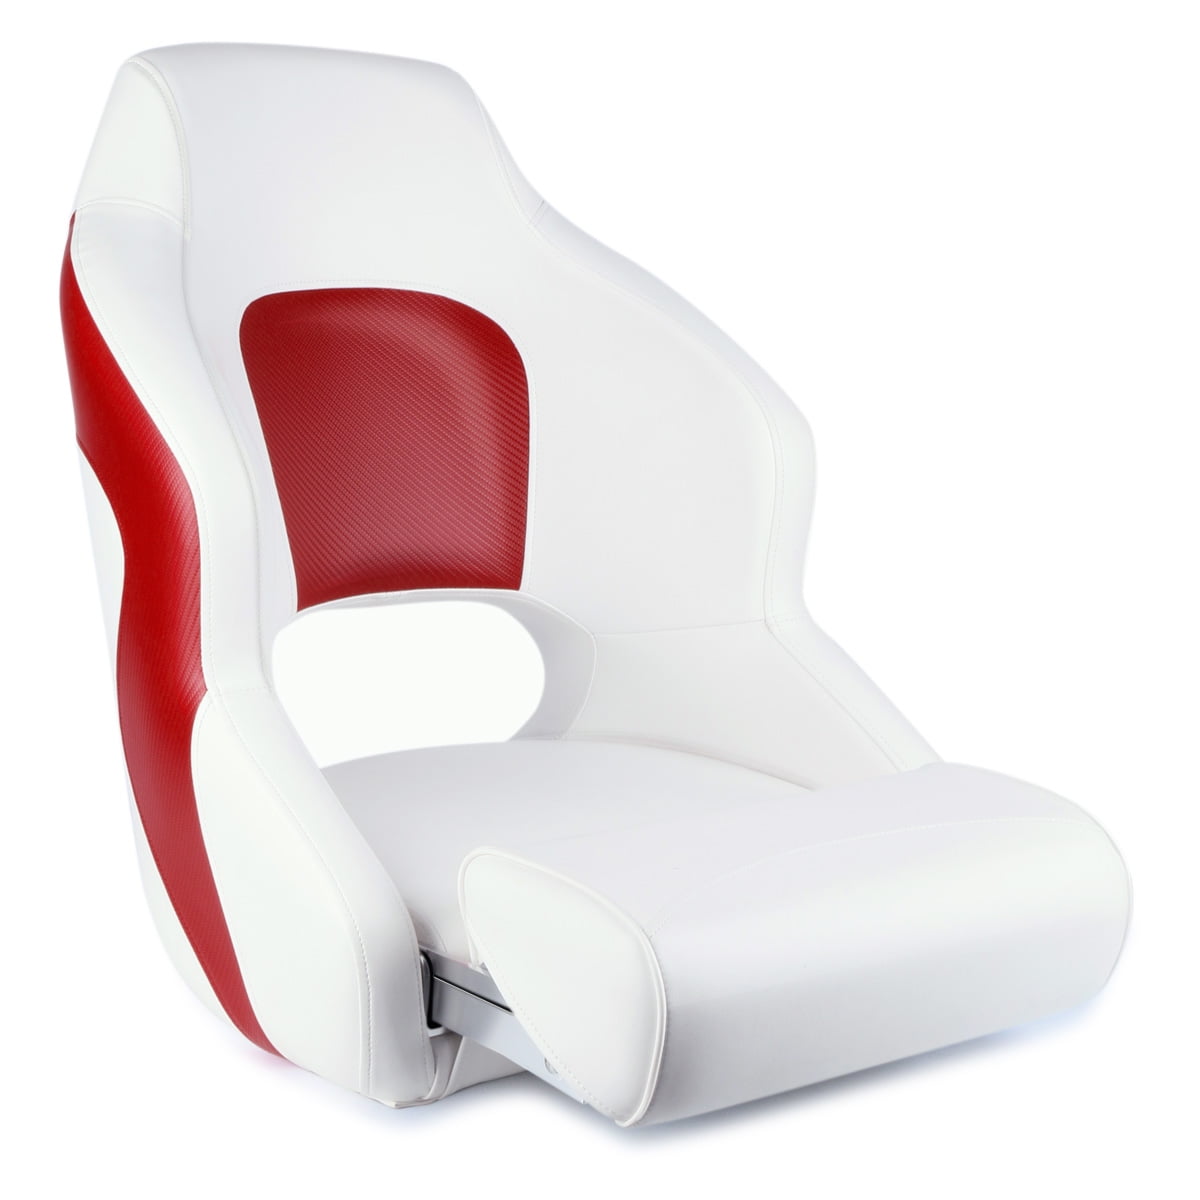 Bucket Seat Boat, White Boat Captains Chair